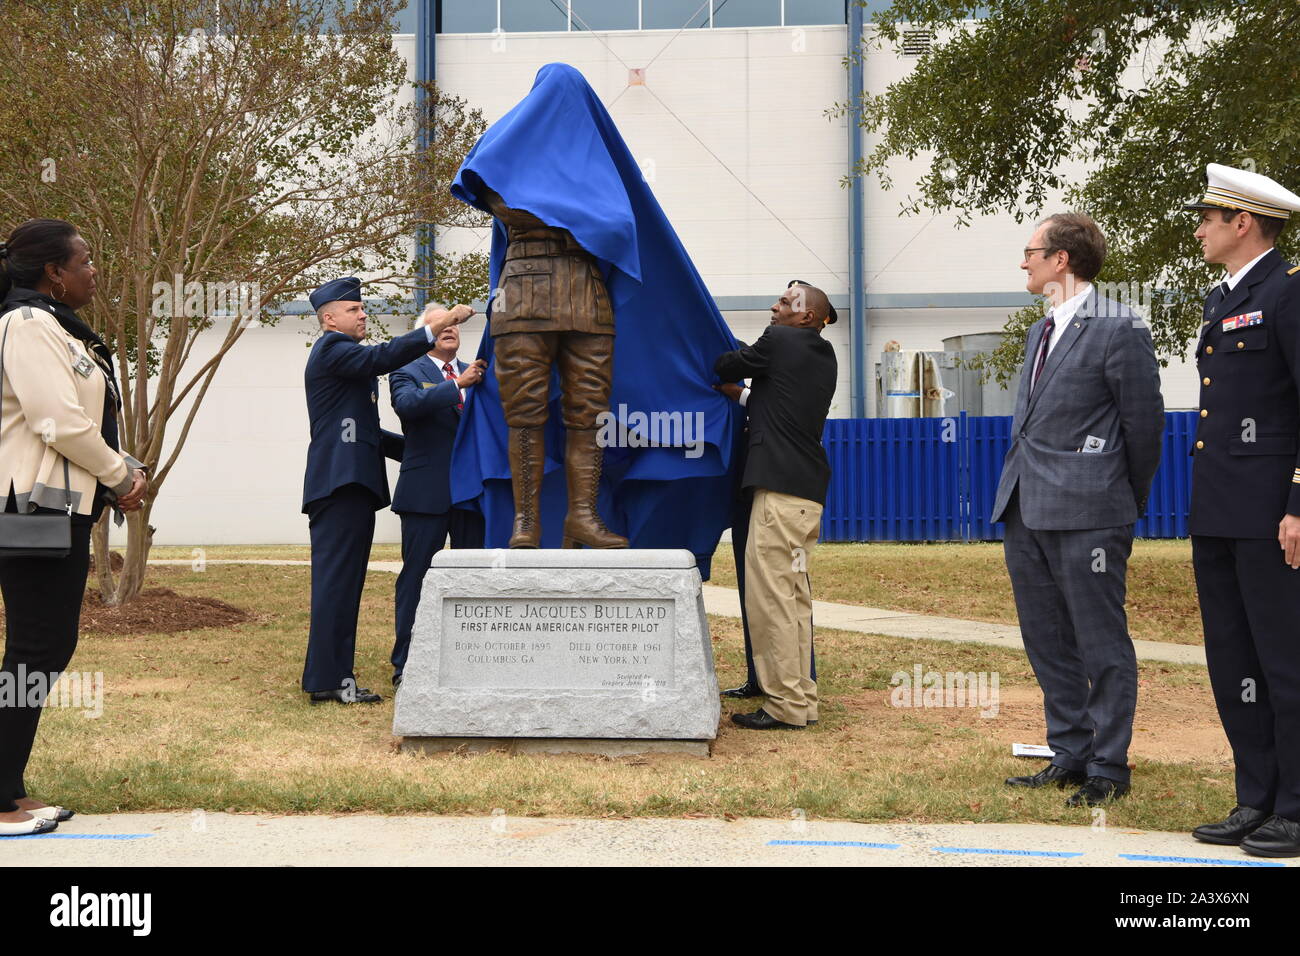 Warner Robins, United States. 09 October, 2019. Military officials and family members watch as a statue of 2nd Lt. Eugene Jacques Bullard, the first African American fighter pilot, is unveiled during a ceremony at the Museum of Aviation on Warner Robins Air Force Base October 9, 2019 in Warner Robins, Georgia. The statue was donated to the United States Air Force by the Georgia World War I Centennial Commission.  Credit: Tommie Horton/Planetpix/Alamy Live News Stock Photo